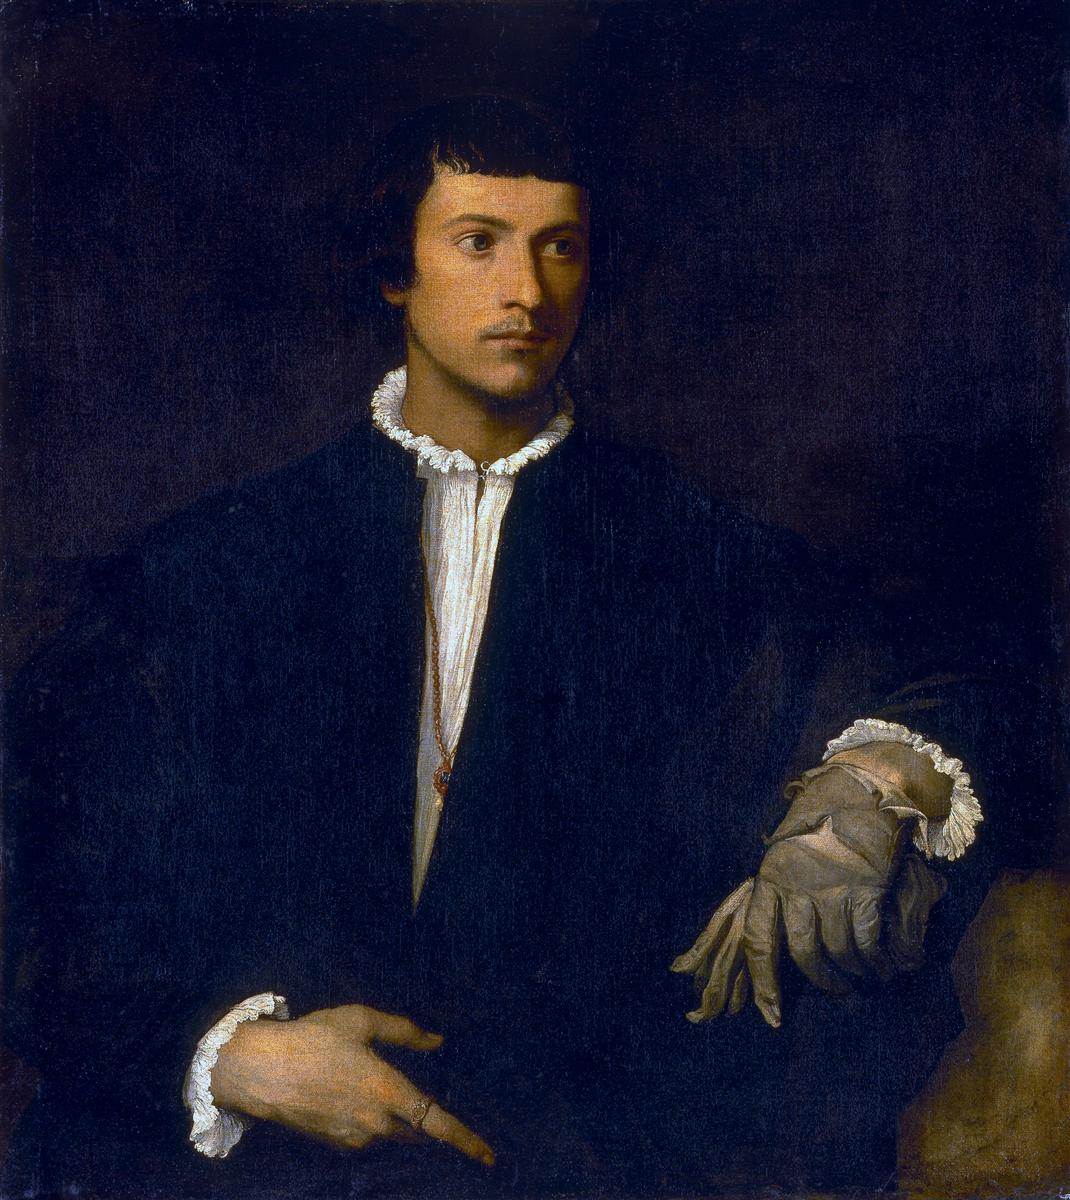 TItian. Man with a glove. Oil on canvas. 100 x 89 cm. ca. 1520-1525.